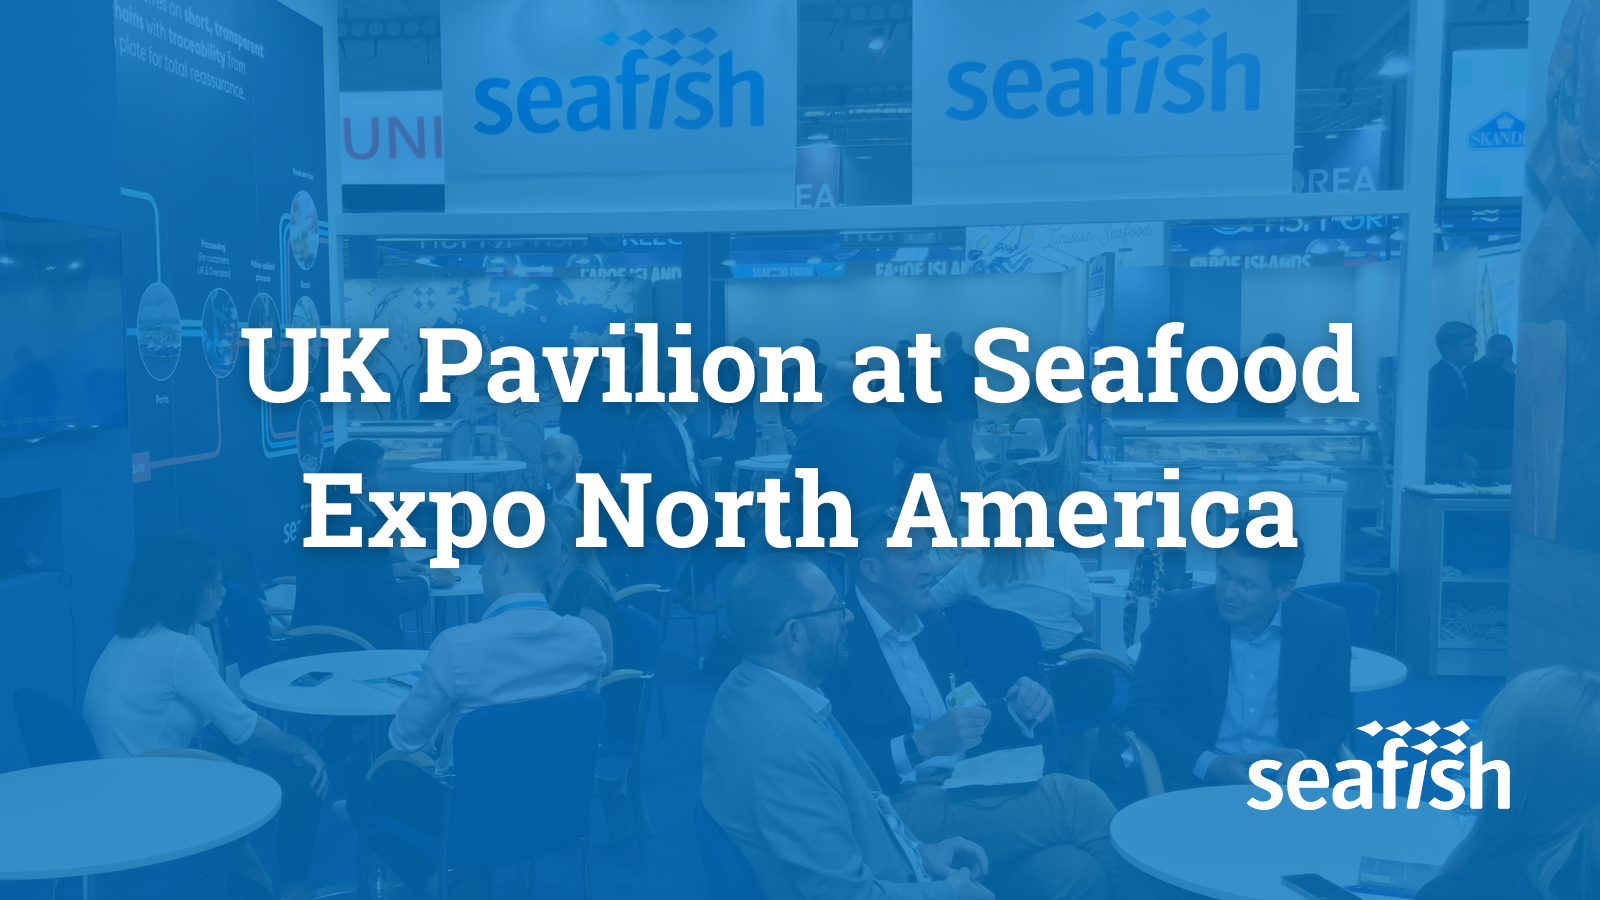 UK Pavilion at Seafood Expo North America